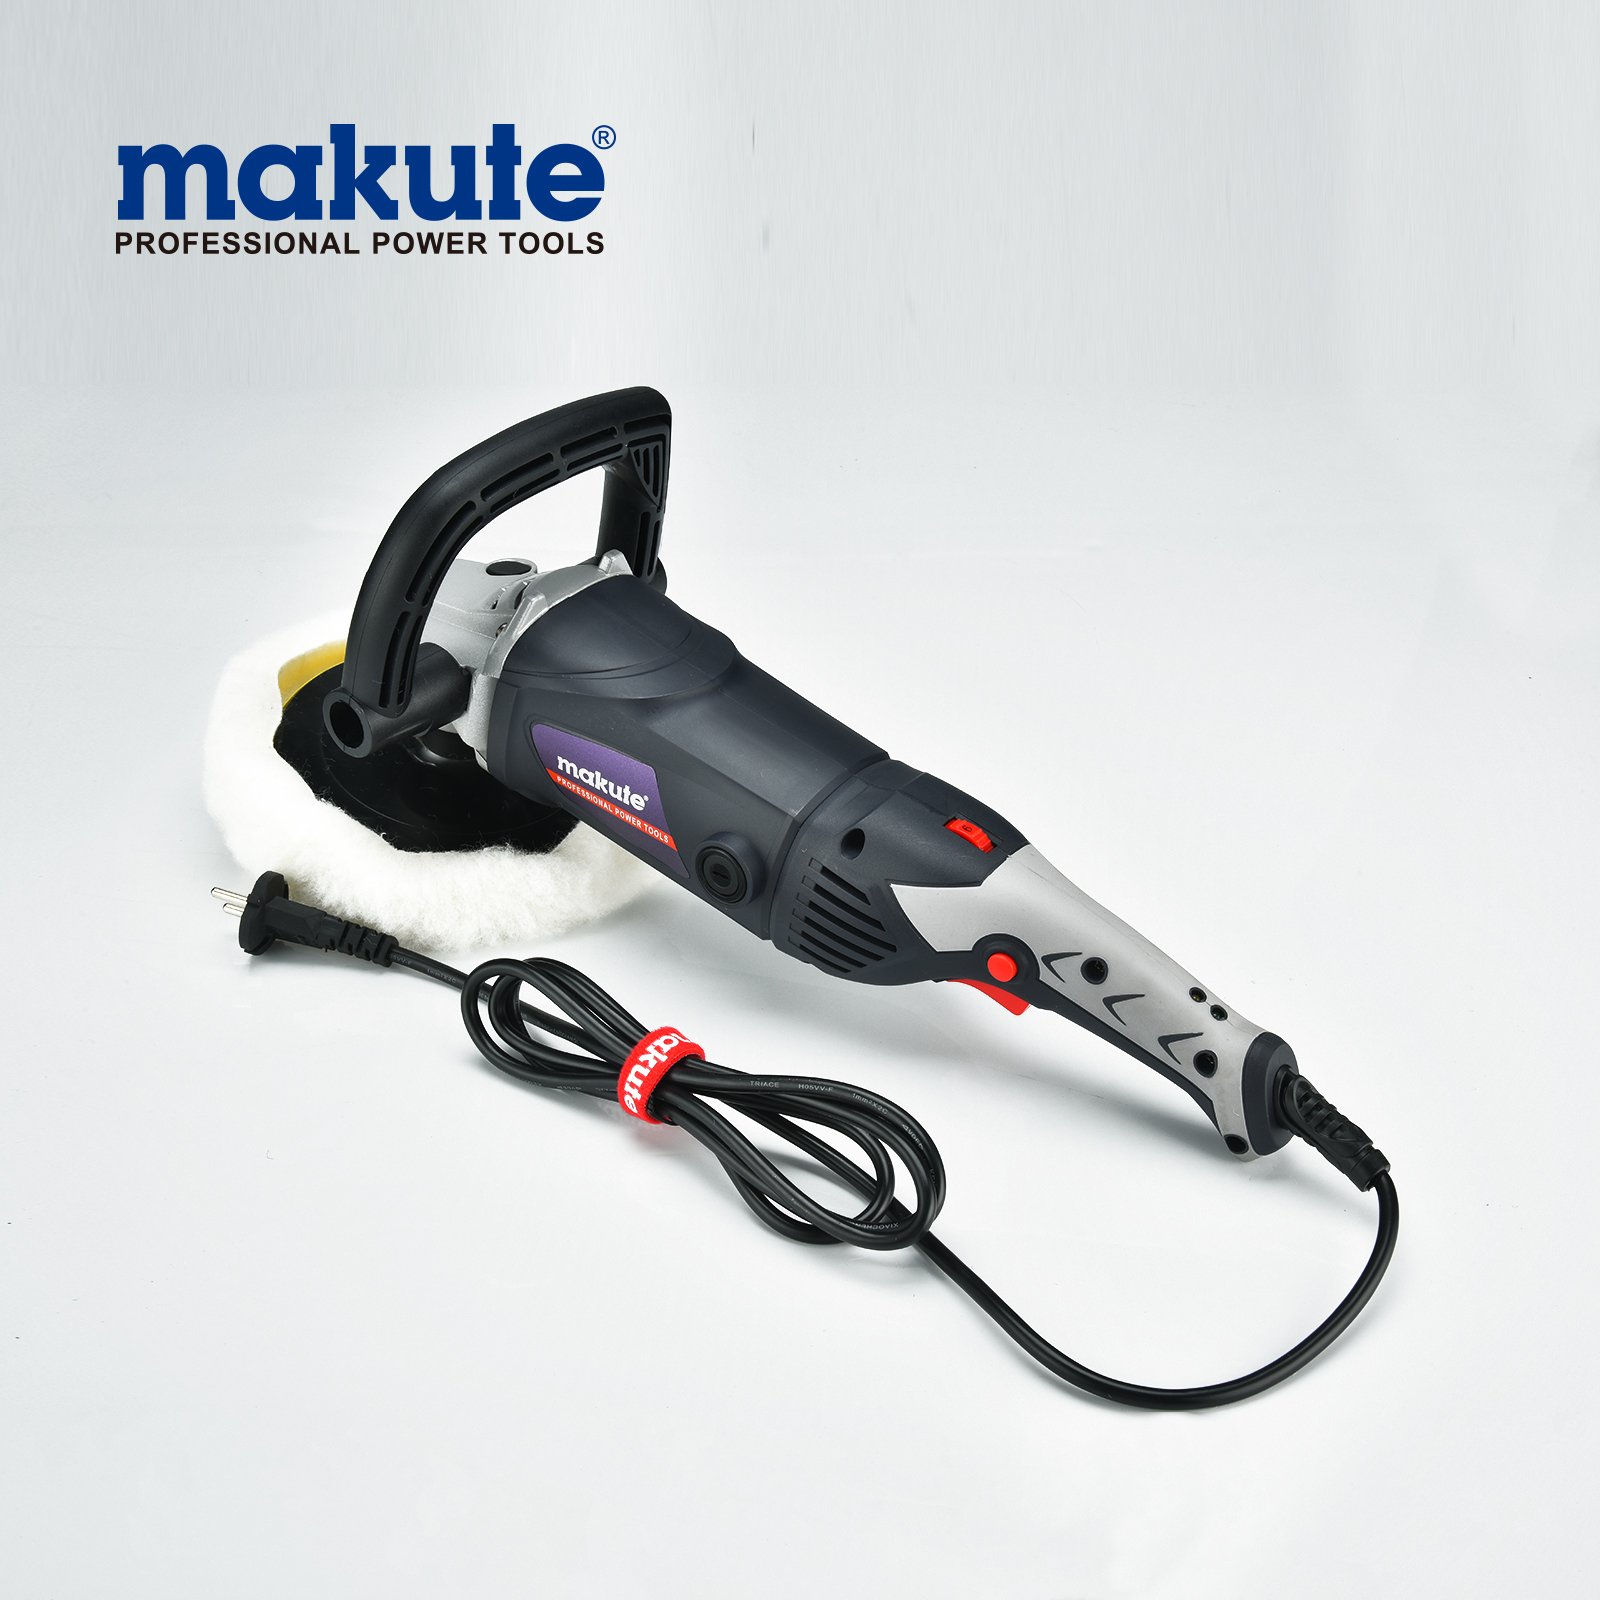 Makute 1600w electric power tool